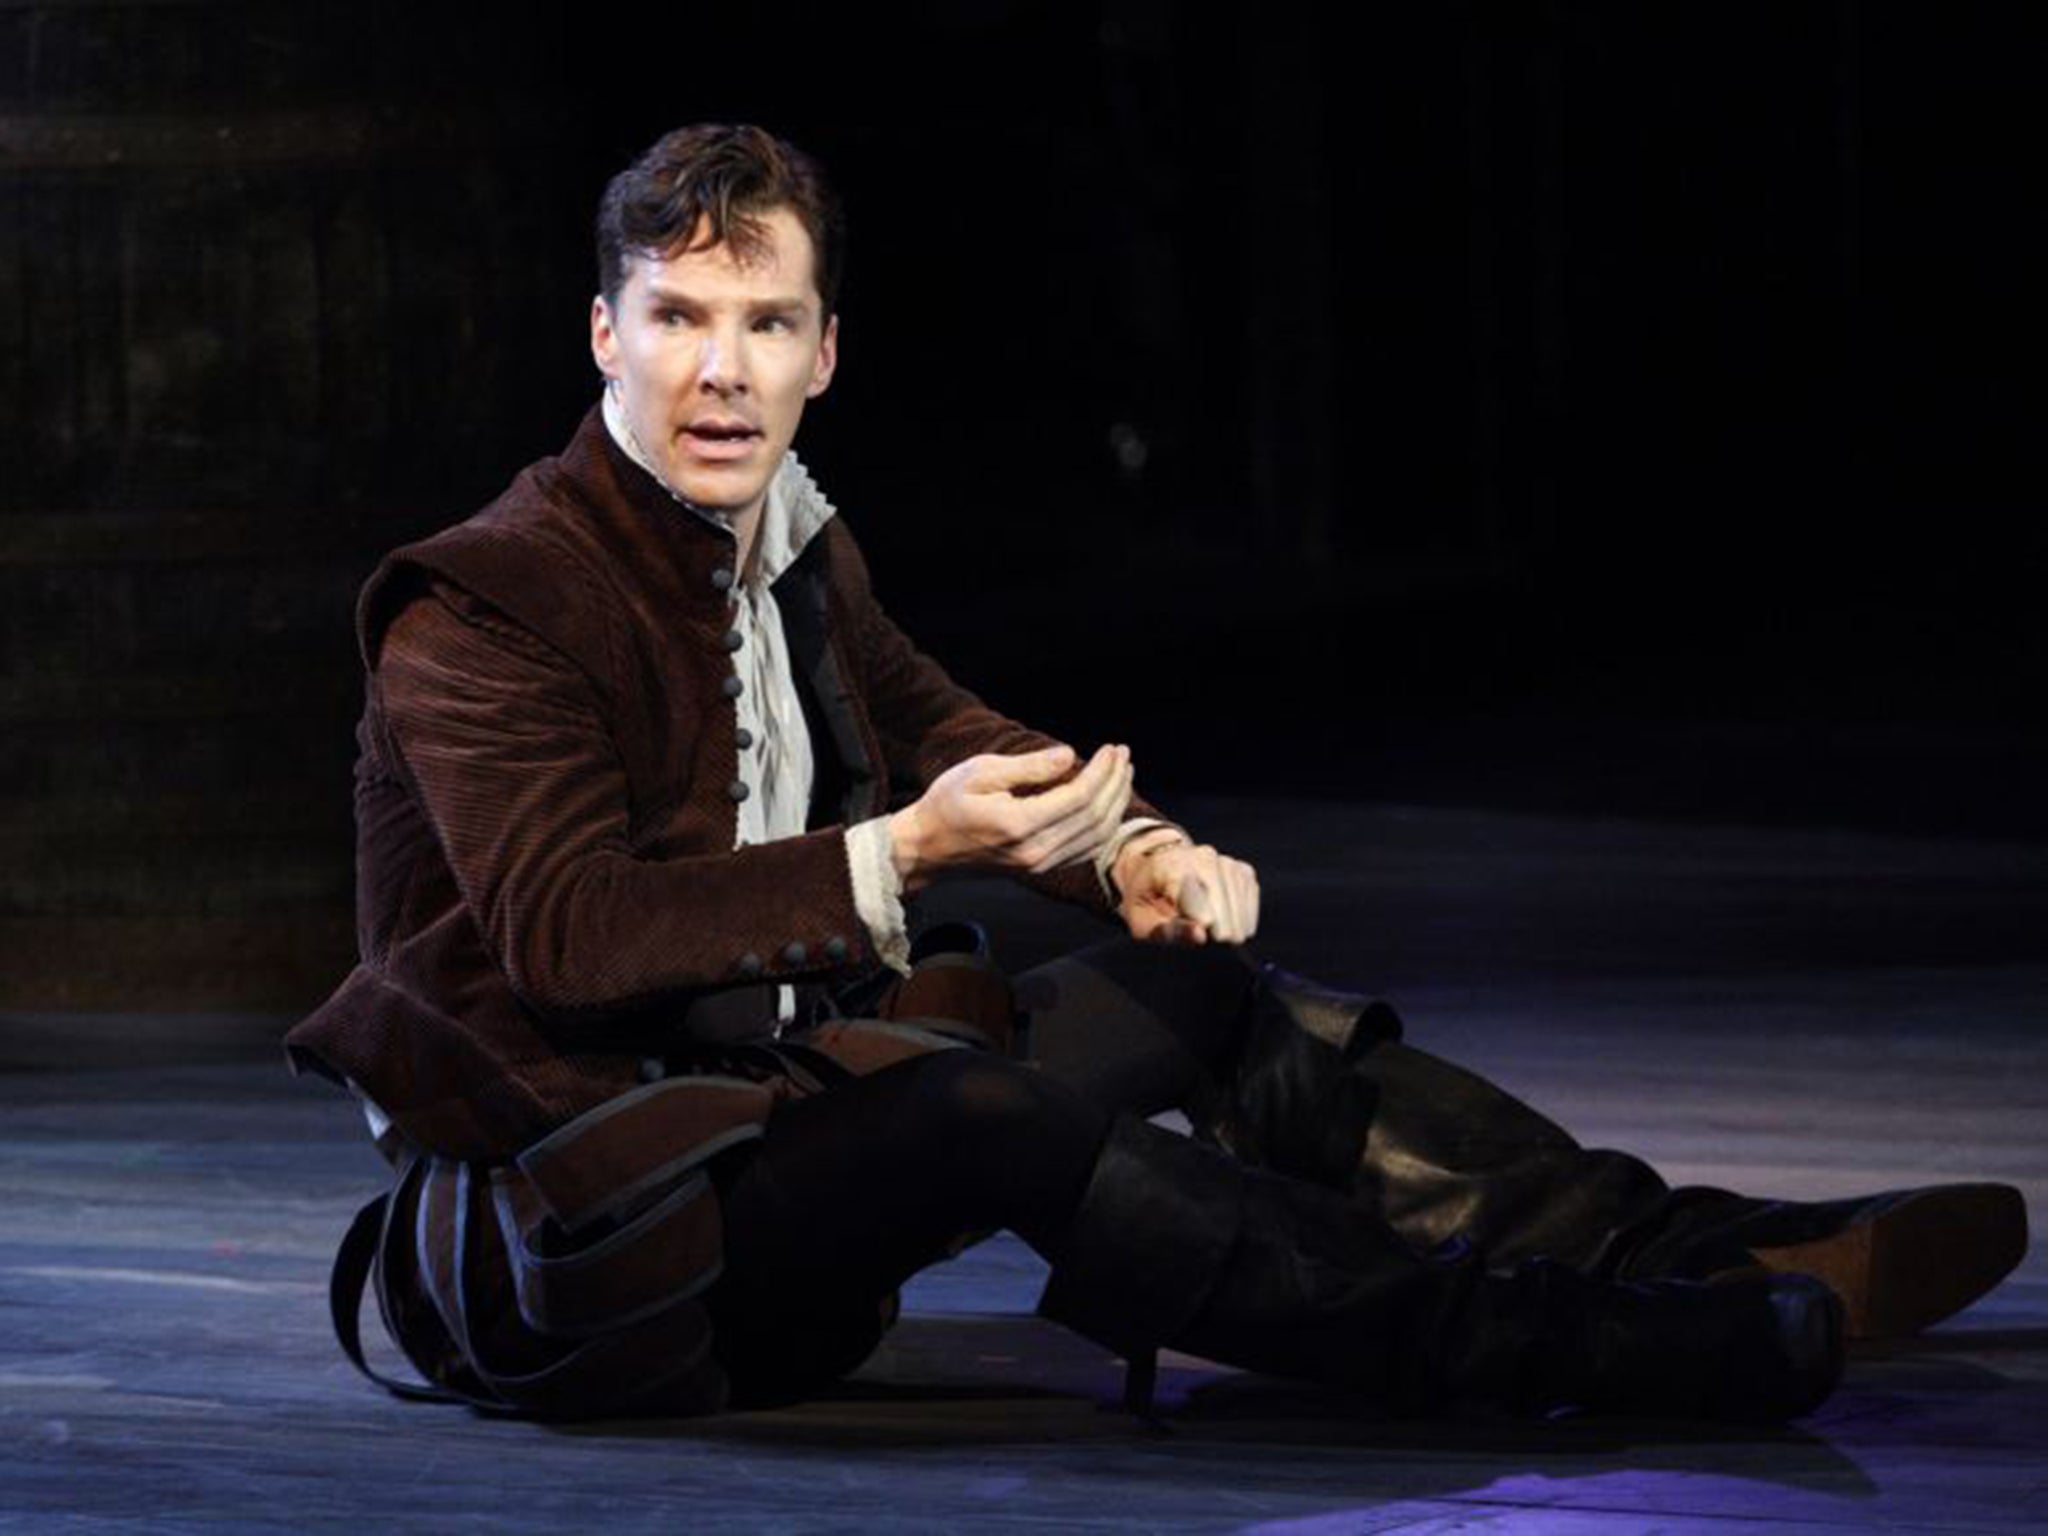 In his role as Hamlet, Benedict Cumberbatch will have to learn, and repeat night after night, around 1,480 lines